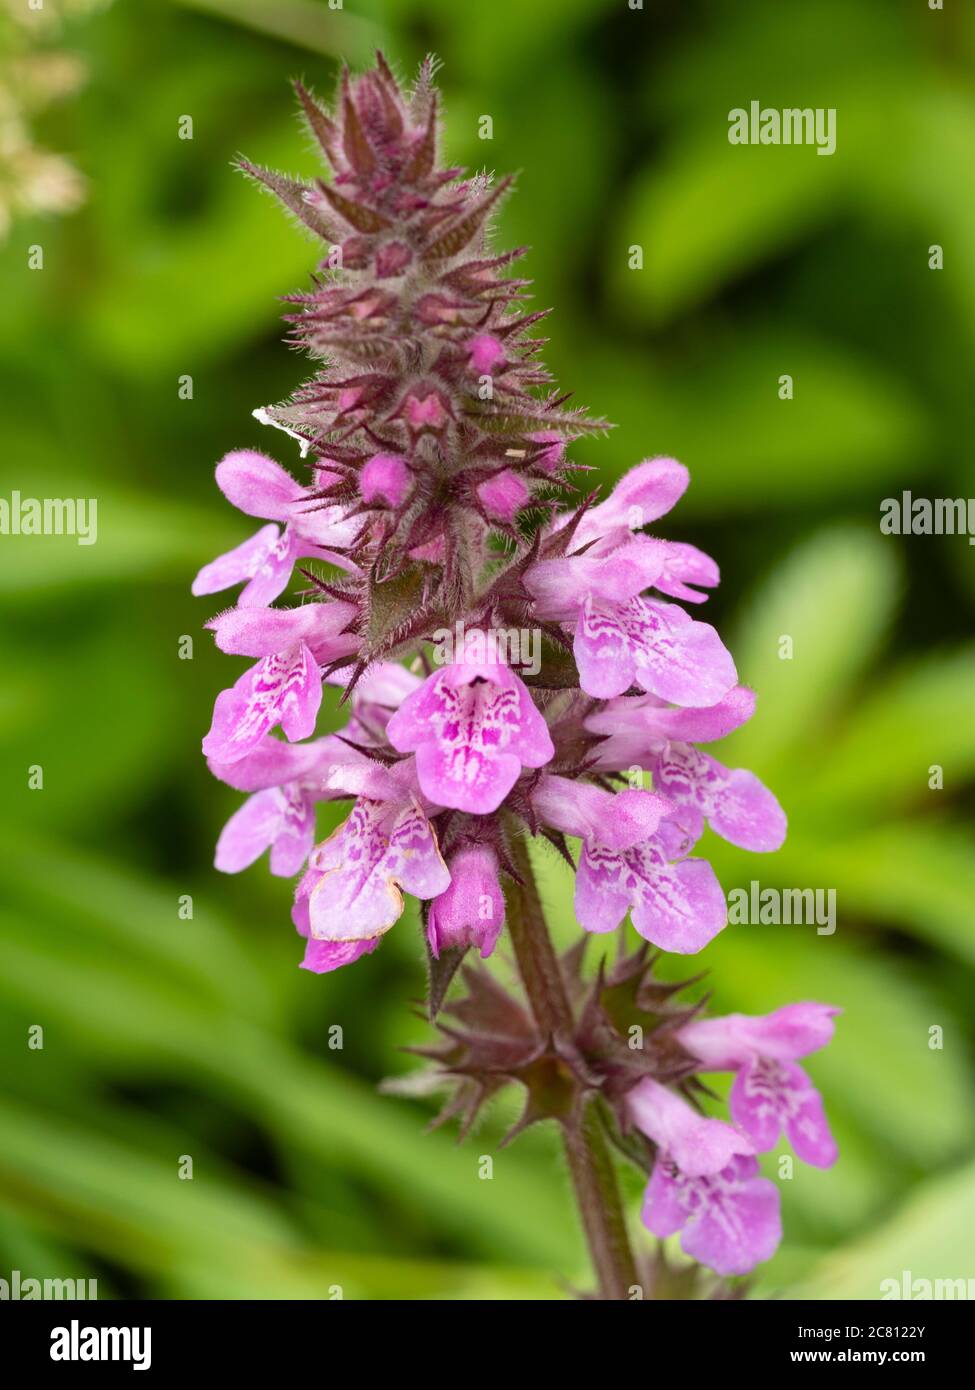 Summer spikes of the pink flowered sterile hybrid woundwort, Stachys x ambigua (Stachys palustris x sylvatica). Stock Photo